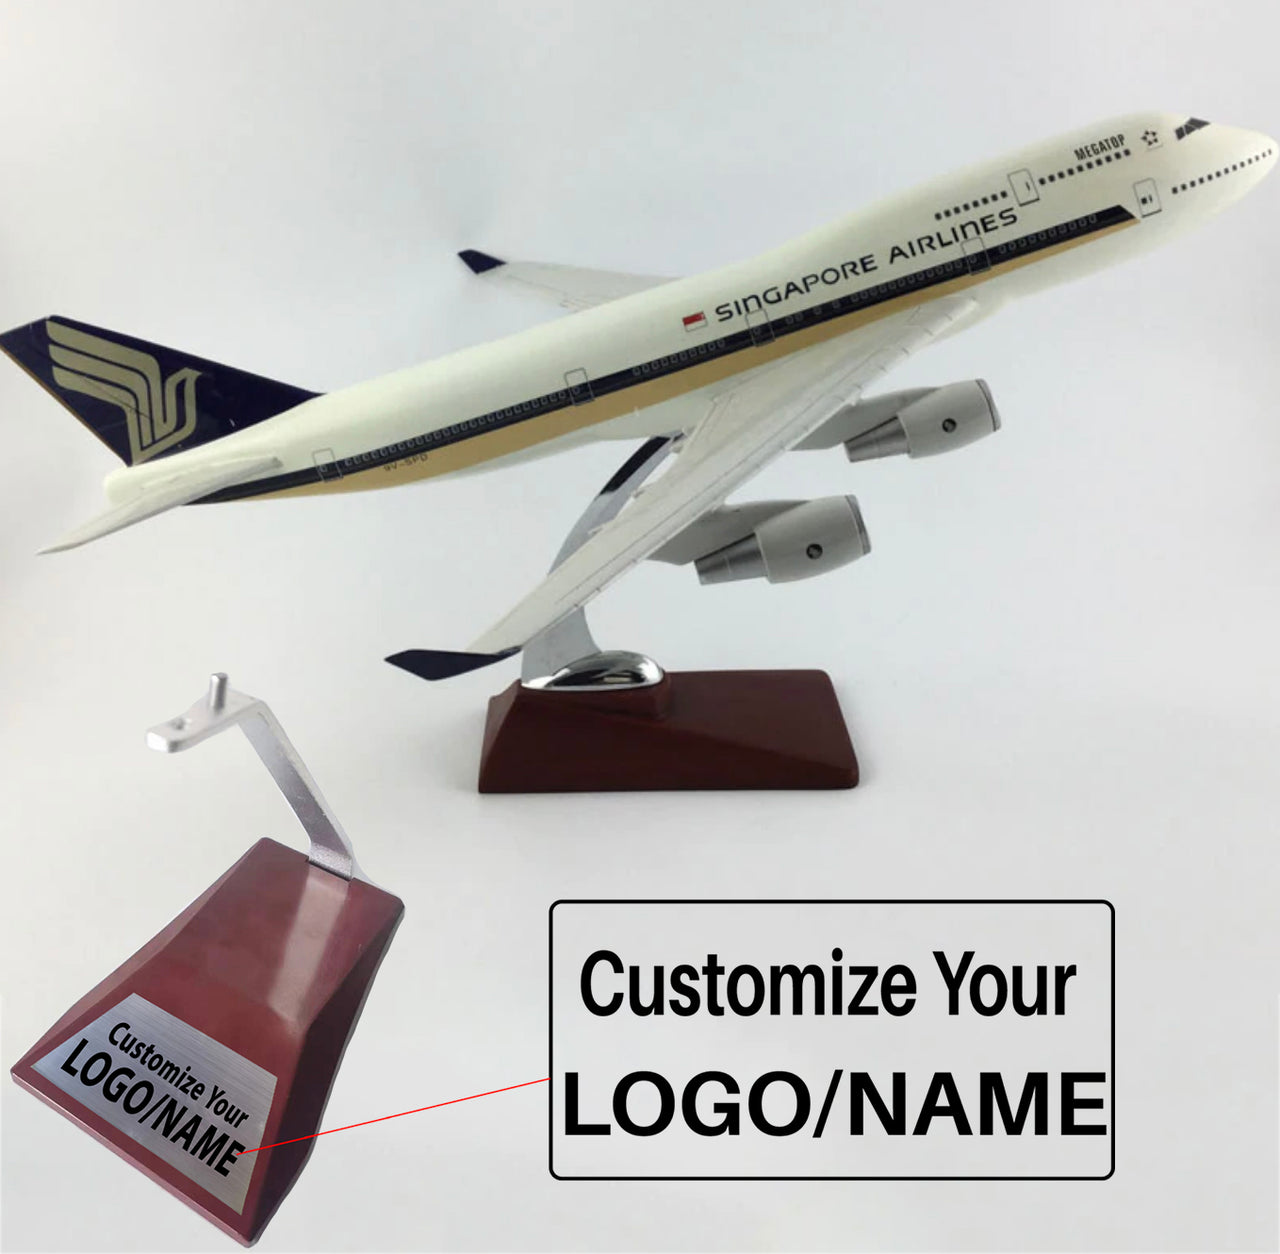 Singapore Airlines Boeing 747 Airplane Model (Handmade Special Edition 45CM)